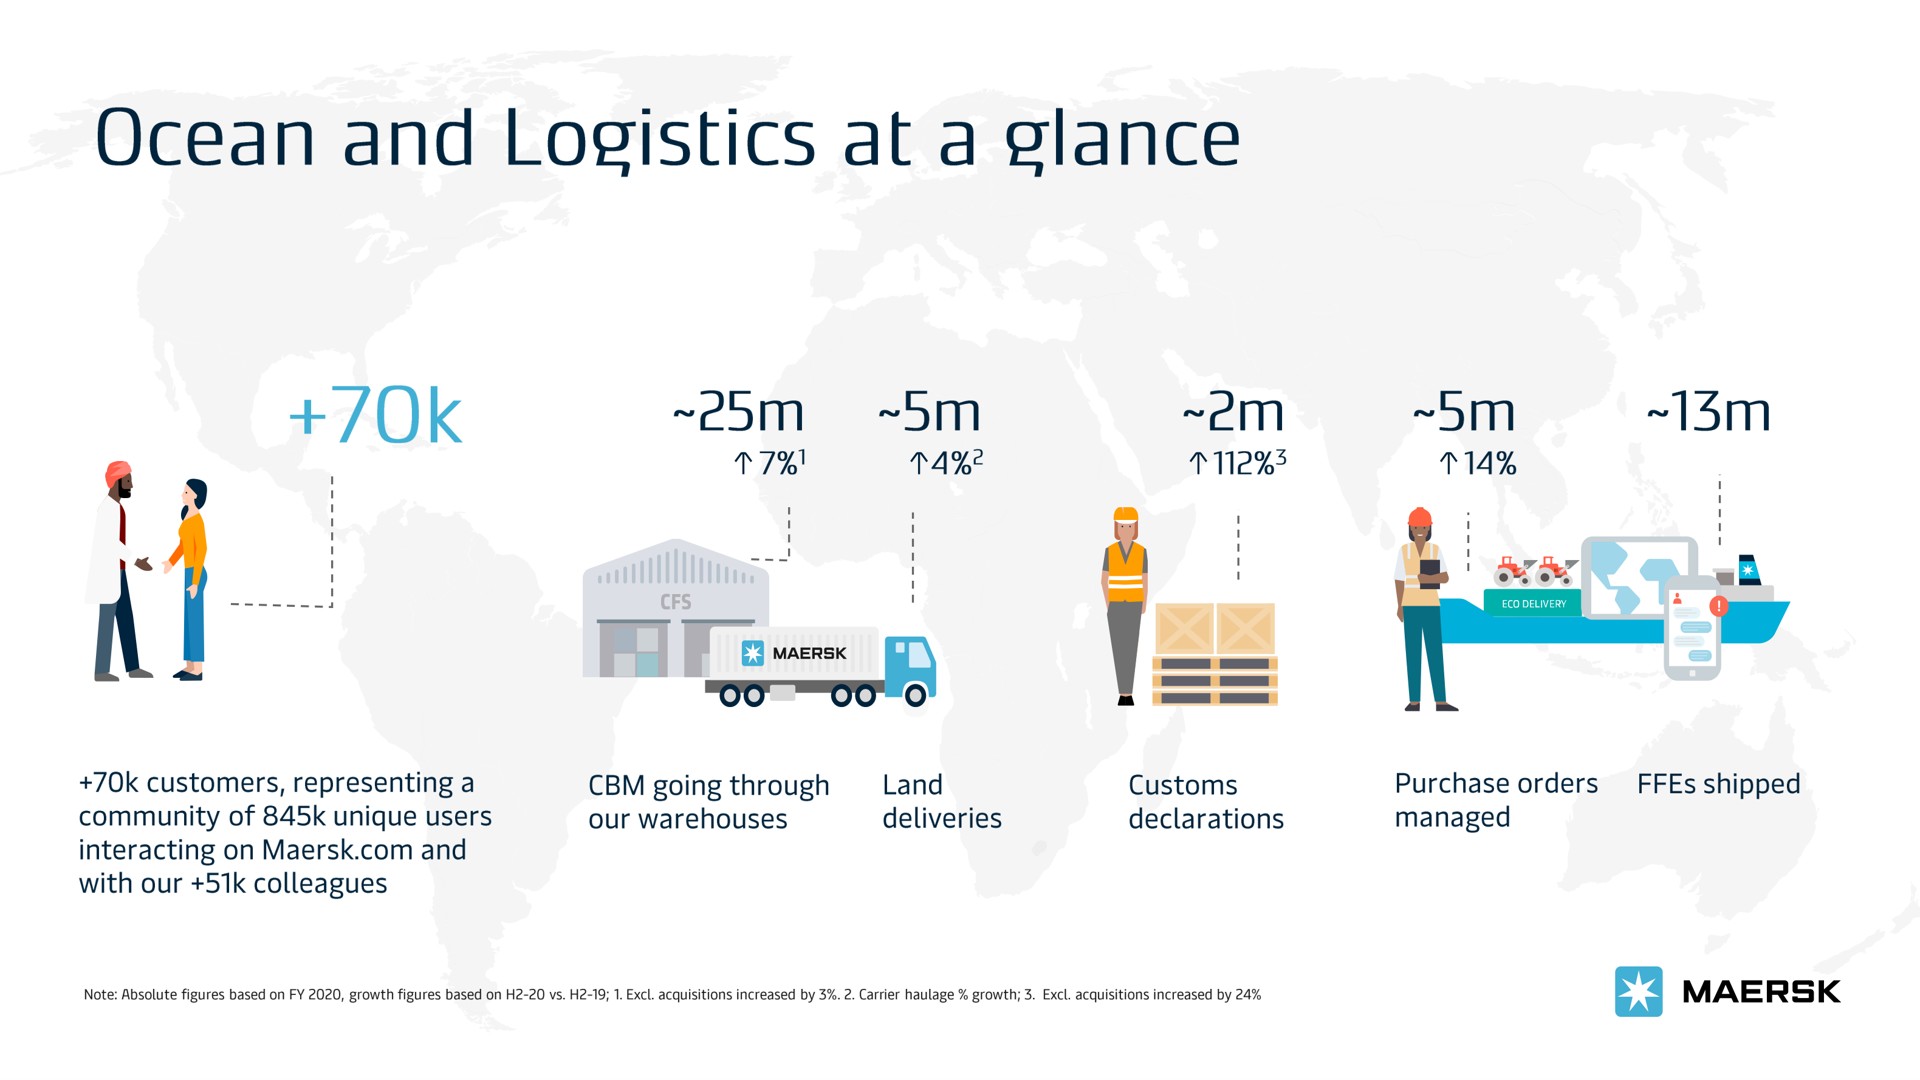 ocean and logistics at a glance | Maersk